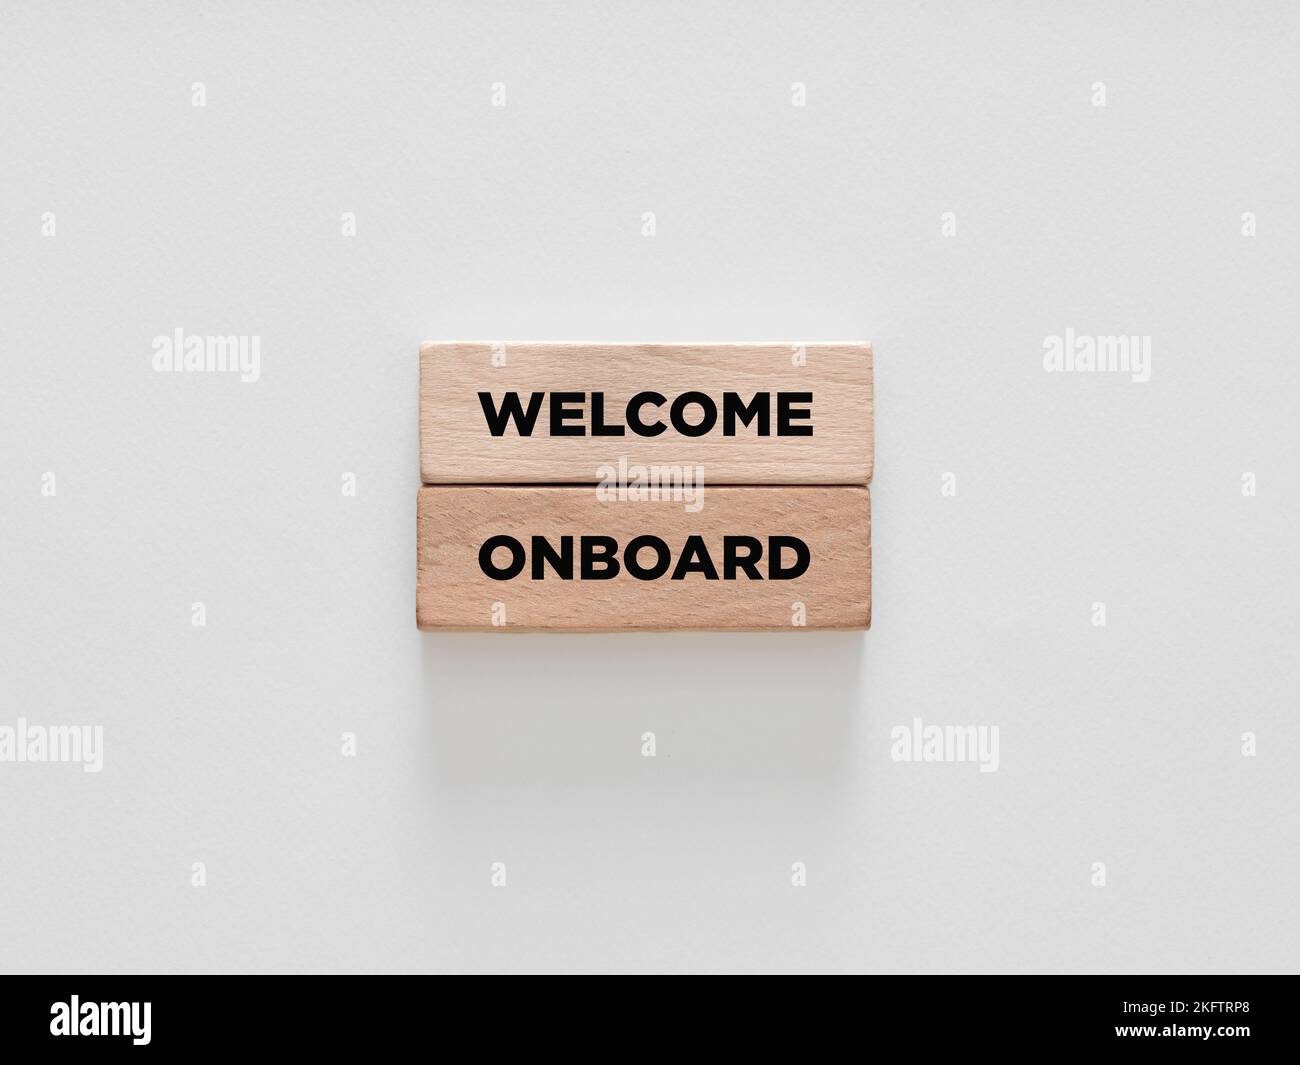 The message welcome onboard on wooden blocks on white background. Business support, teamwork and onboarding concept. Stock Photo